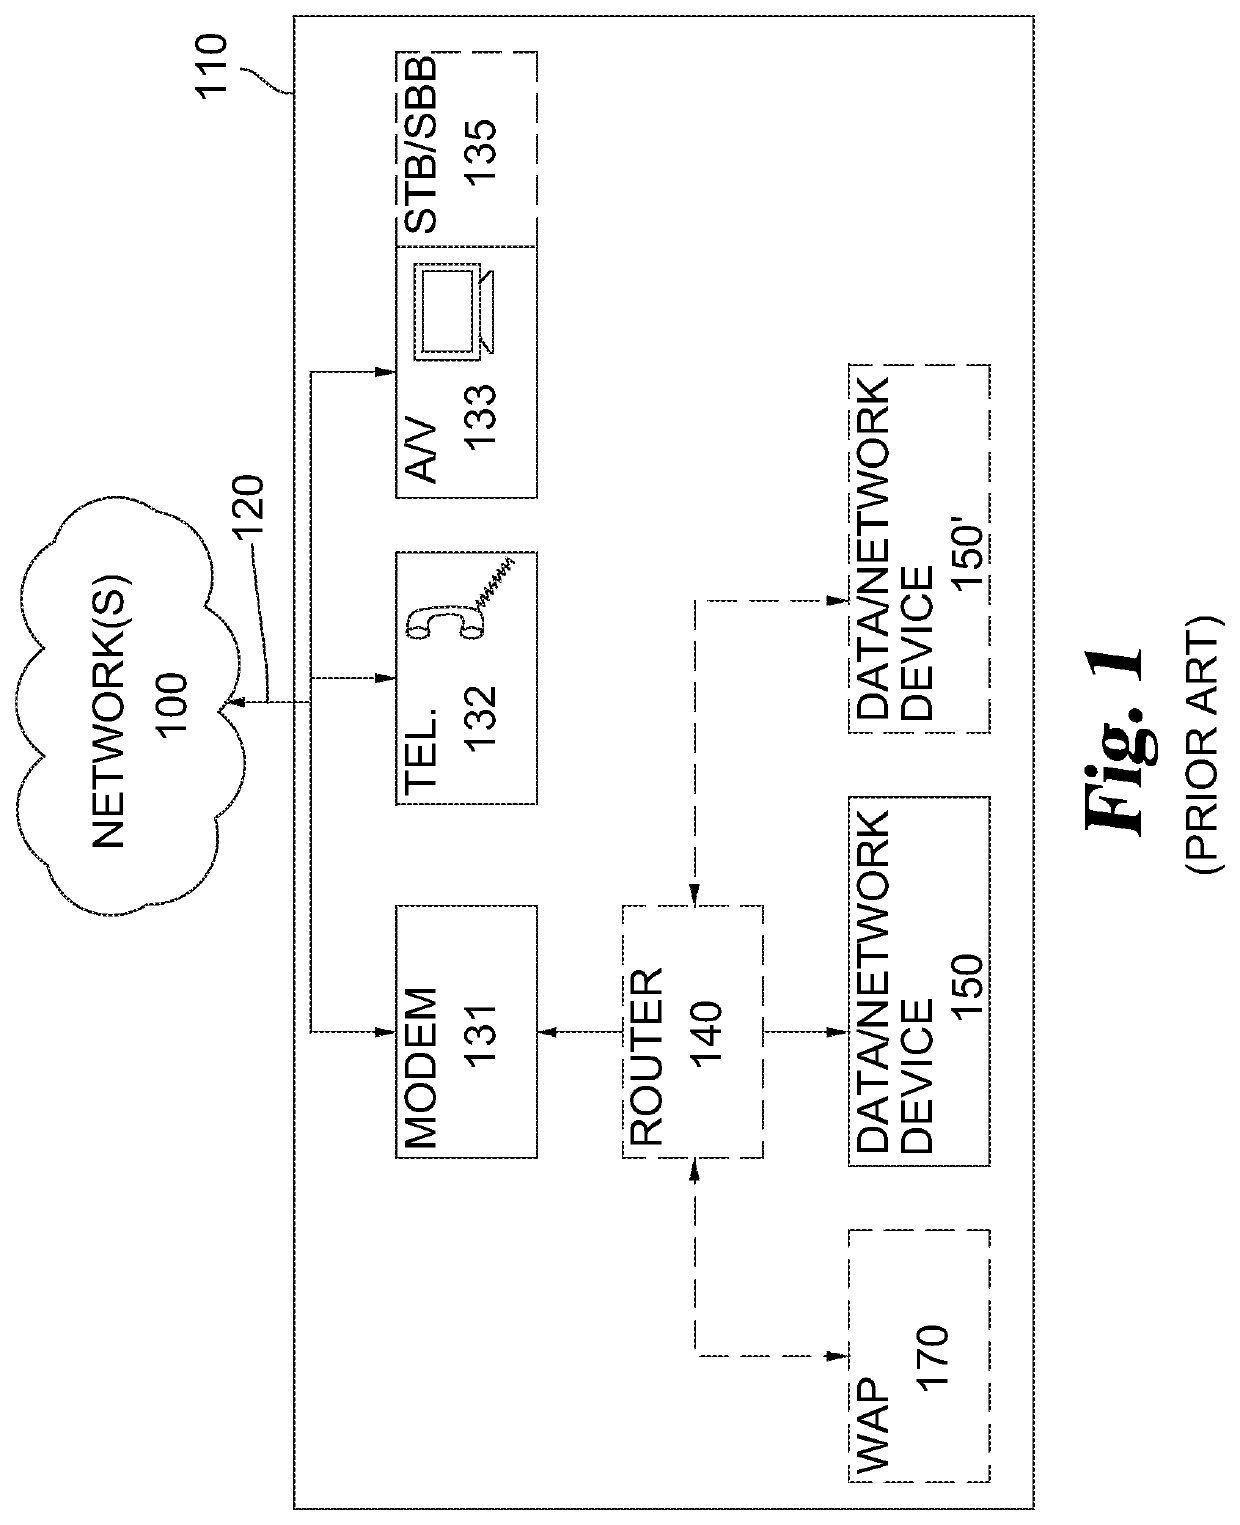 Networking modules for display systems